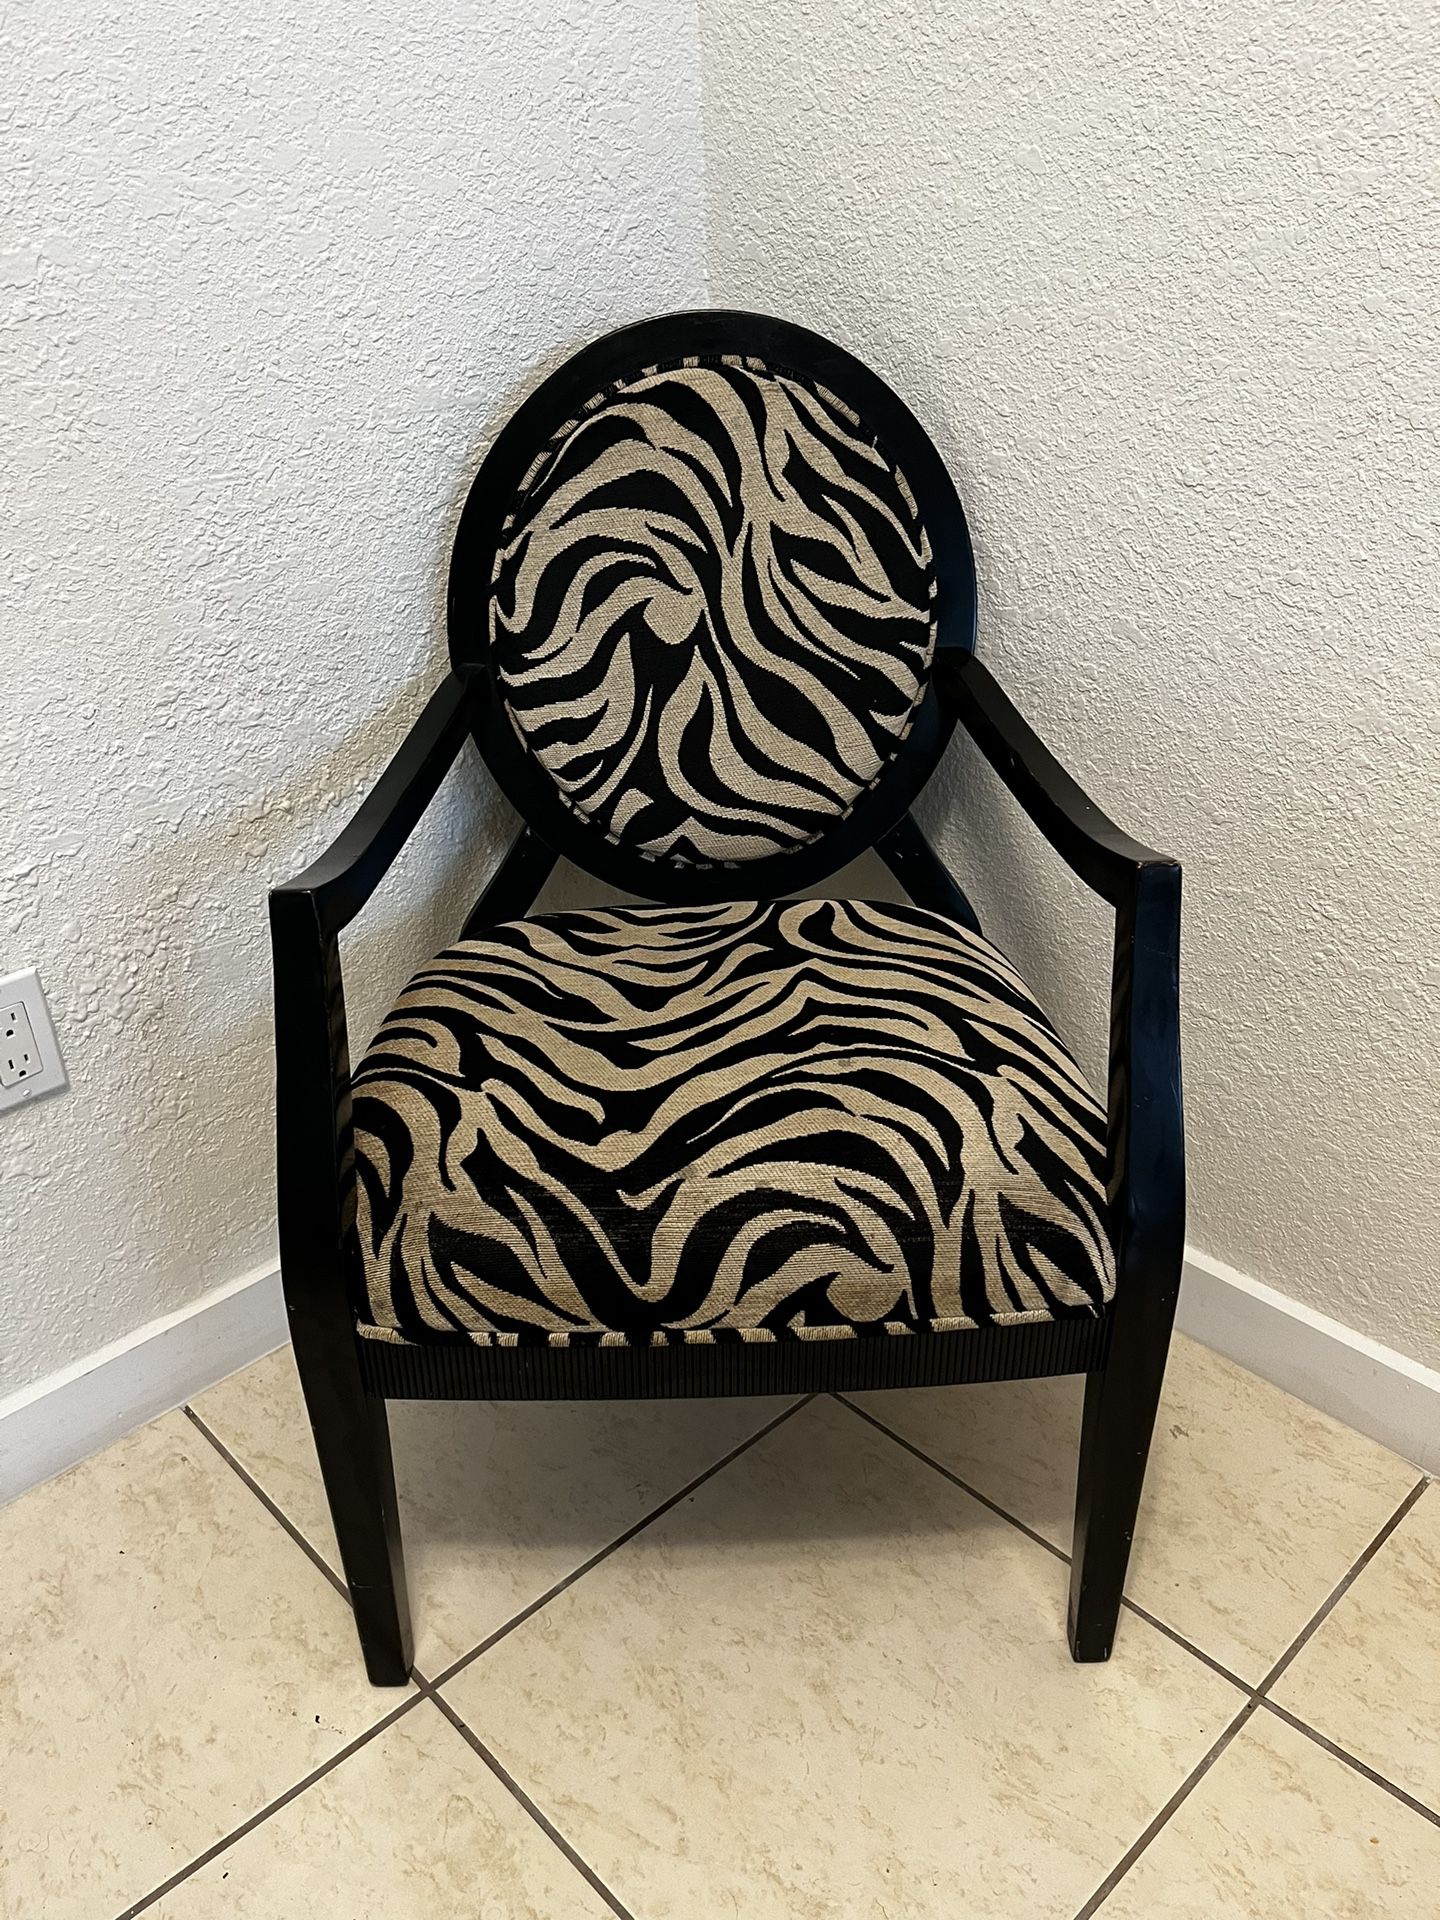 Modern Bergere occasional chair Desk Side Vanity French Tiger Zebra Chenille $75 OBO delivery Available